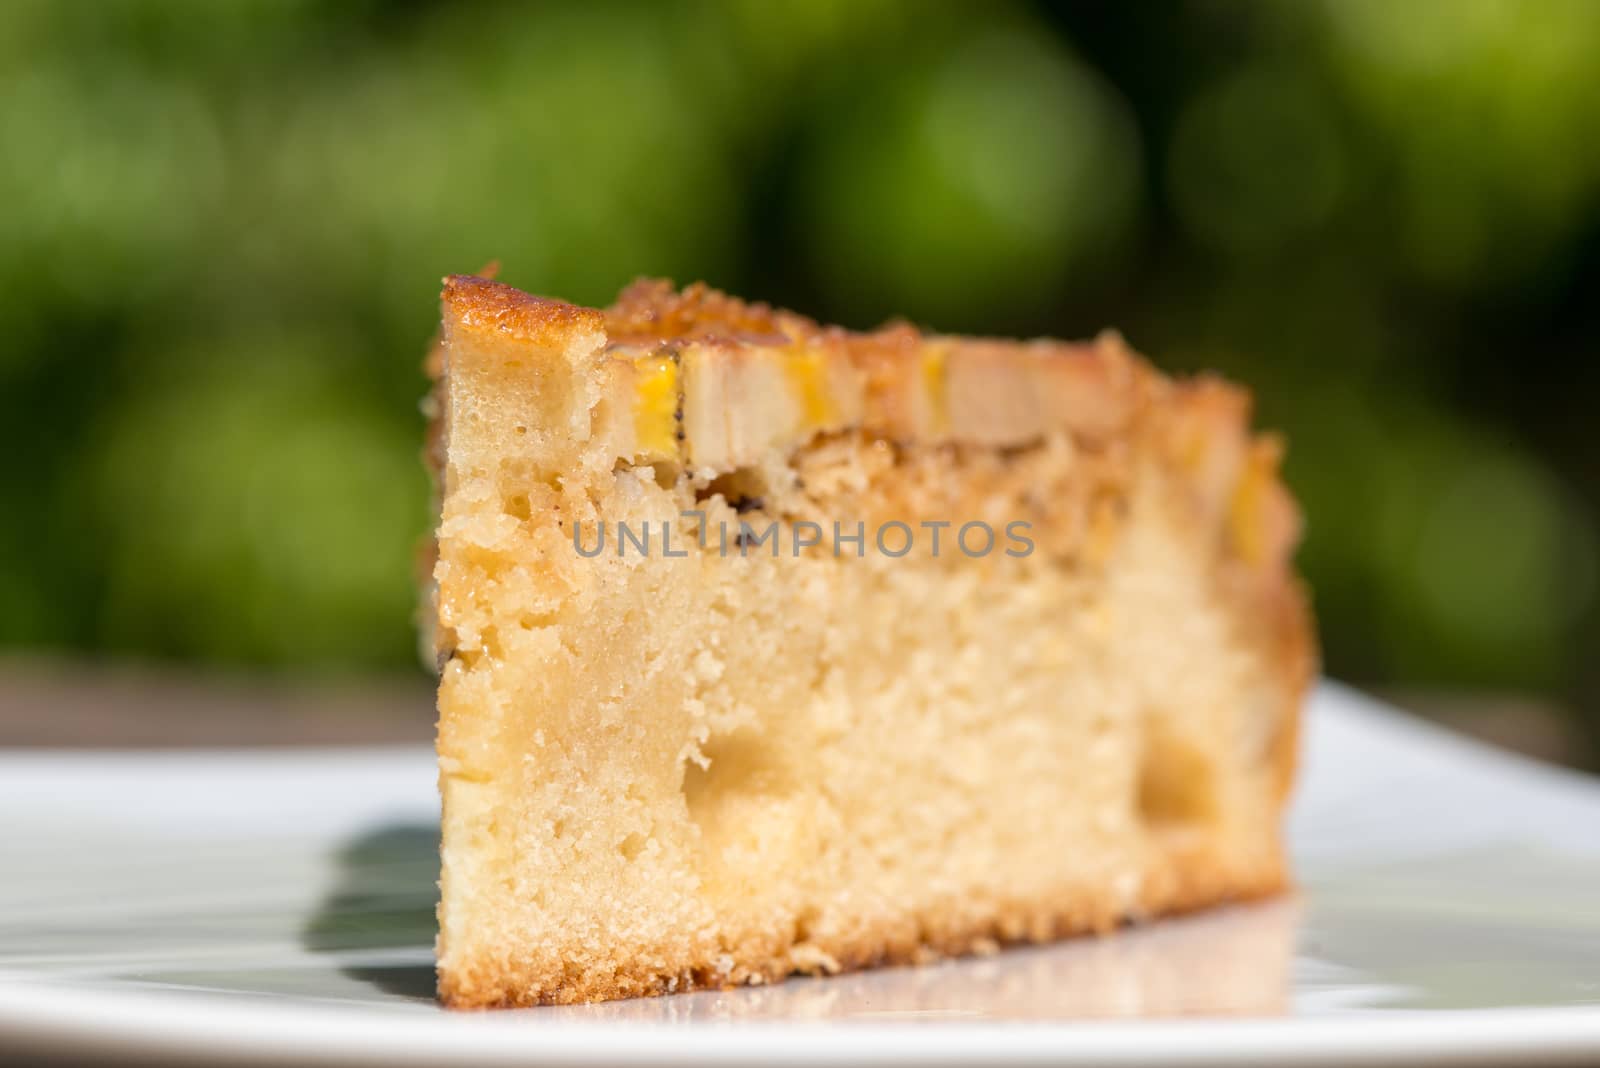 Upside down banana cake with coconut and caramel